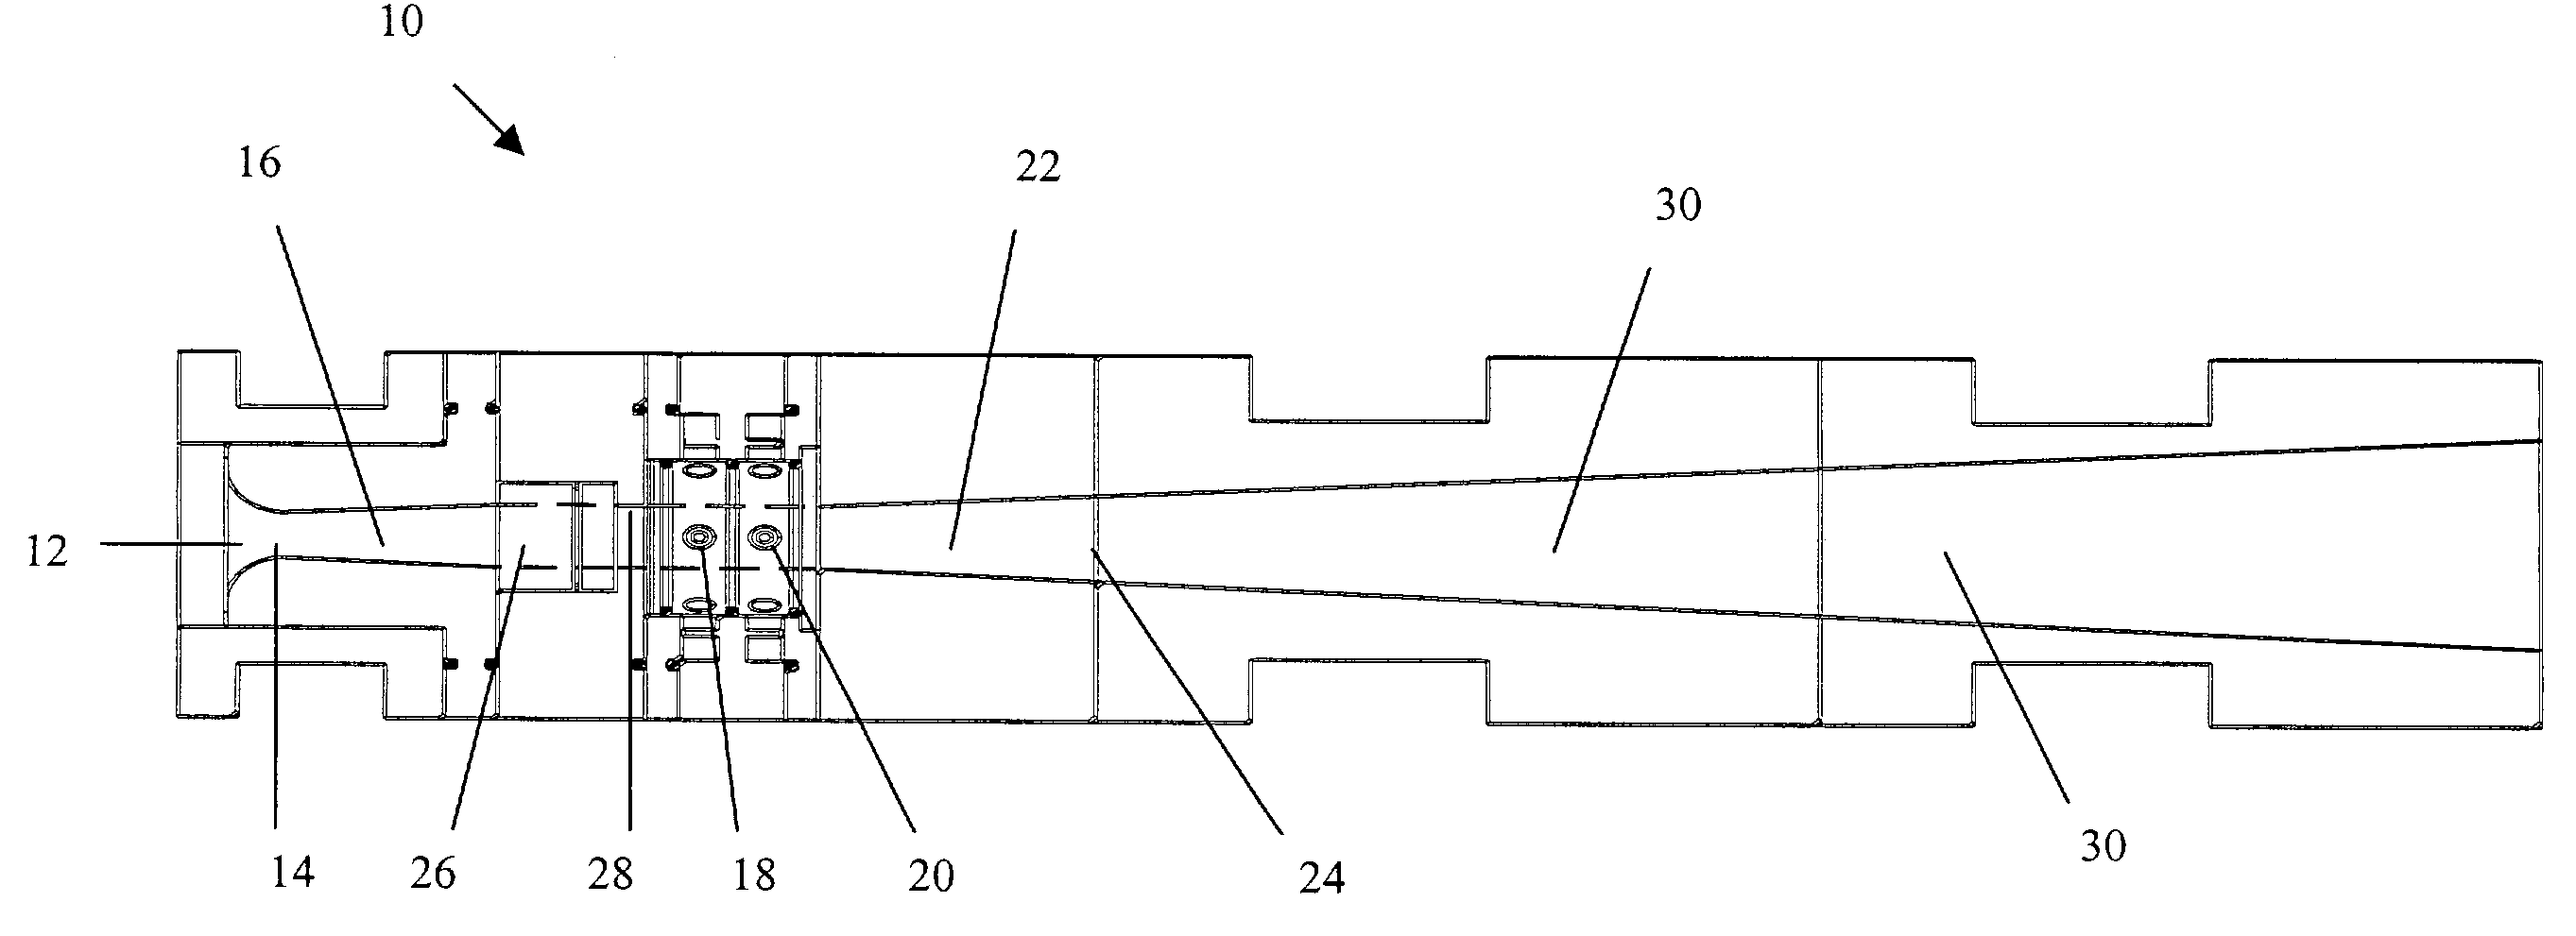 Apparatus and method of using supersonic combustion heater for hypersonic materials and propulsion testing